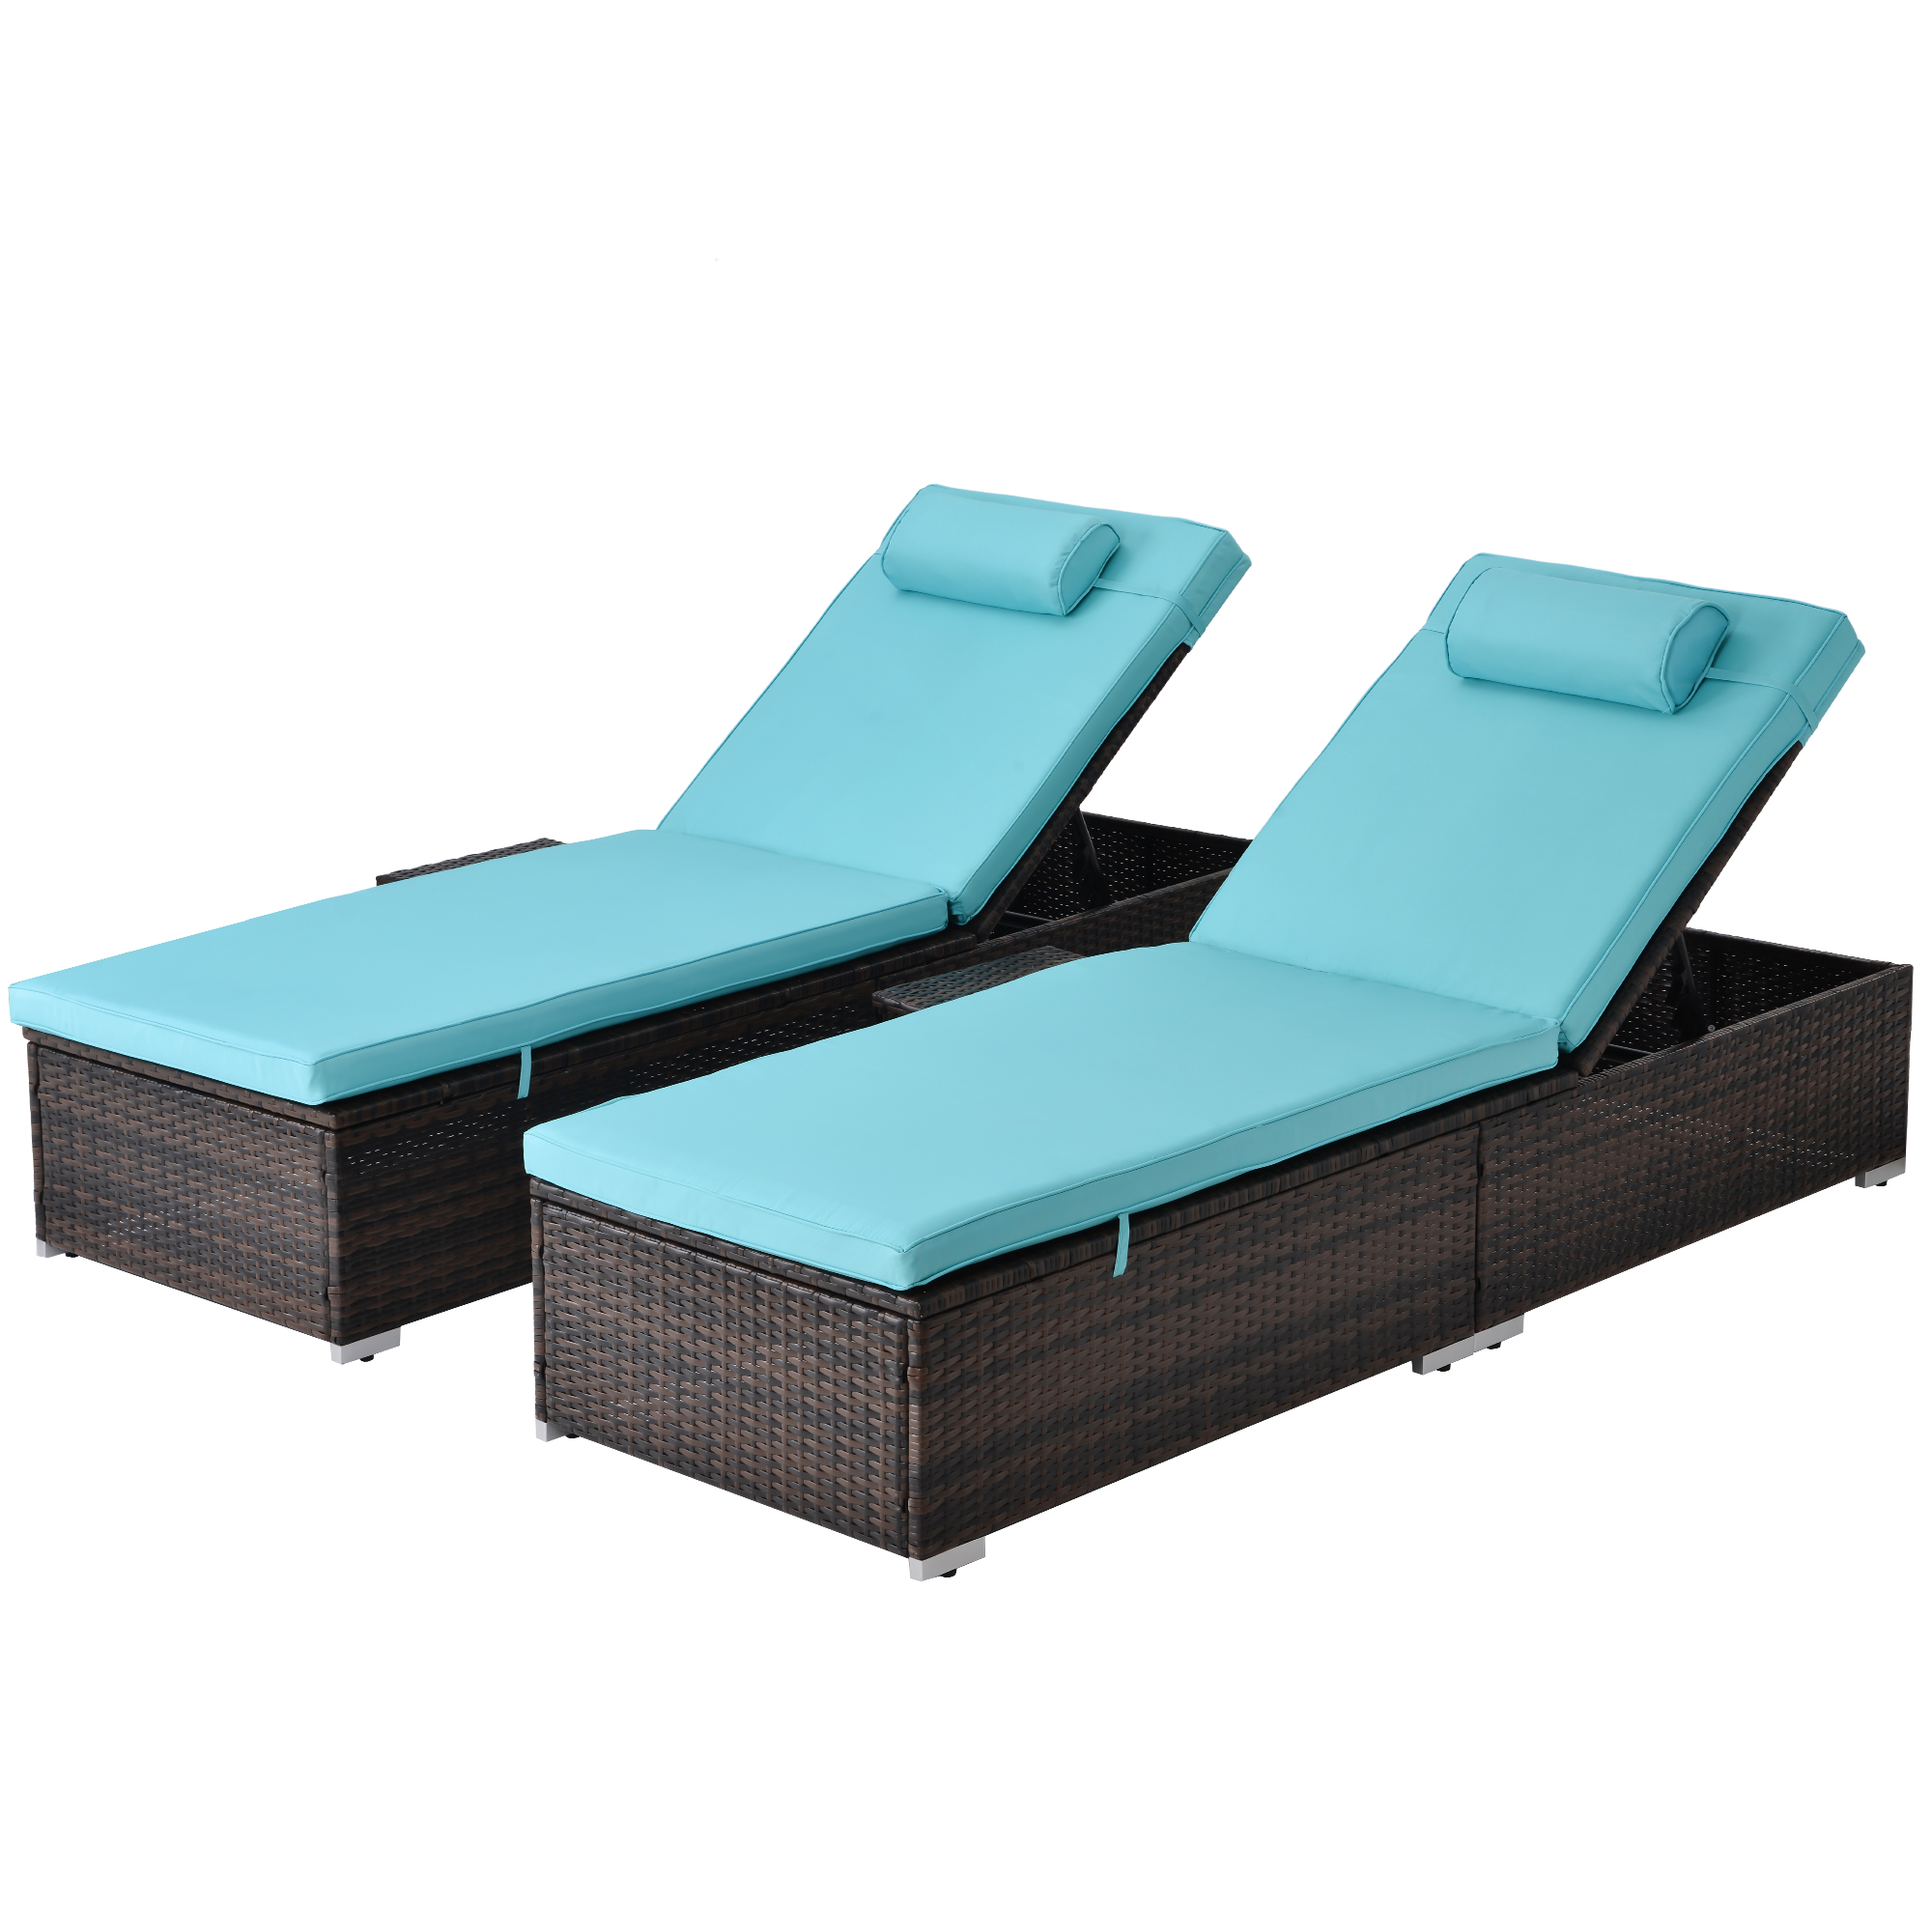 2 Piece Outdoor Patio Lounge Chairs, Adjustable Wicker Recliner PE Rattan Reclining Chair Set with Cushion, Side Table & Head Pillow, Outdoor Chaise Lounge for Garden Balcony Pool Deck Backyard, J2473 - image 3 of 14